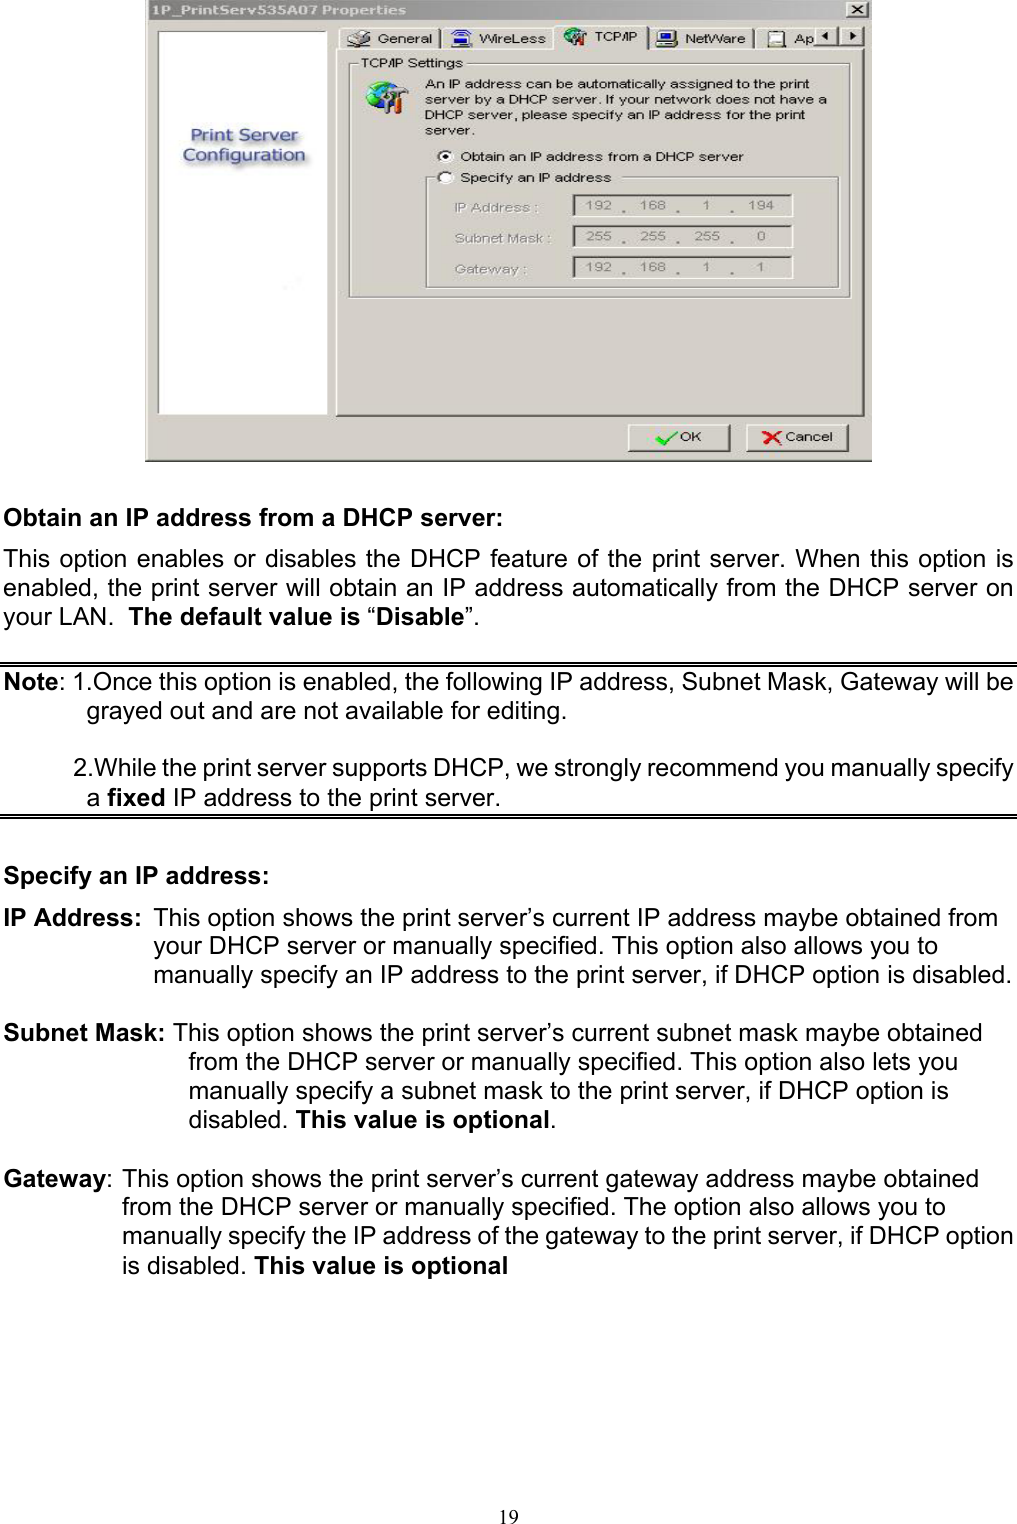                                                                                             19    Obtain an IP address from a DHCP server: This option enables or disables the DHCP feature of the print server. When this option is enabled, the print server will obtain an IP address automatically from the DHCP server on your LAN.  The default value is “Disable”.  Note: 1.Once this option is enabled, the following IP address, Subnet Mask, Gateway will be grayed out and are not available for editing.            2.While the print server supports DHCP, we strongly recommend you manually specify a fixed IP address to the print server.  Specify an IP address: IP Address:  This option shows the print server’s current IP address maybe obtained from your DHCP server or manually specified. This option also allows you to manually specify an IP address to the print server, if DHCP option is disabled.  Subnet Mask: This option shows the print server’s current subnet mask maybe obtained from the DHCP server or manually specified. This option also lets you manually specify a subnet mask to the print server, if DHCP option is disabled. This value is optional.  Gateway: This option shows the print server’s current gateway address maybe obtained from the DHCP server or manually specified. The option also allows you to manually specify the IP address of the gateway to the print server, if DHCP option is disabled. This value is optional  